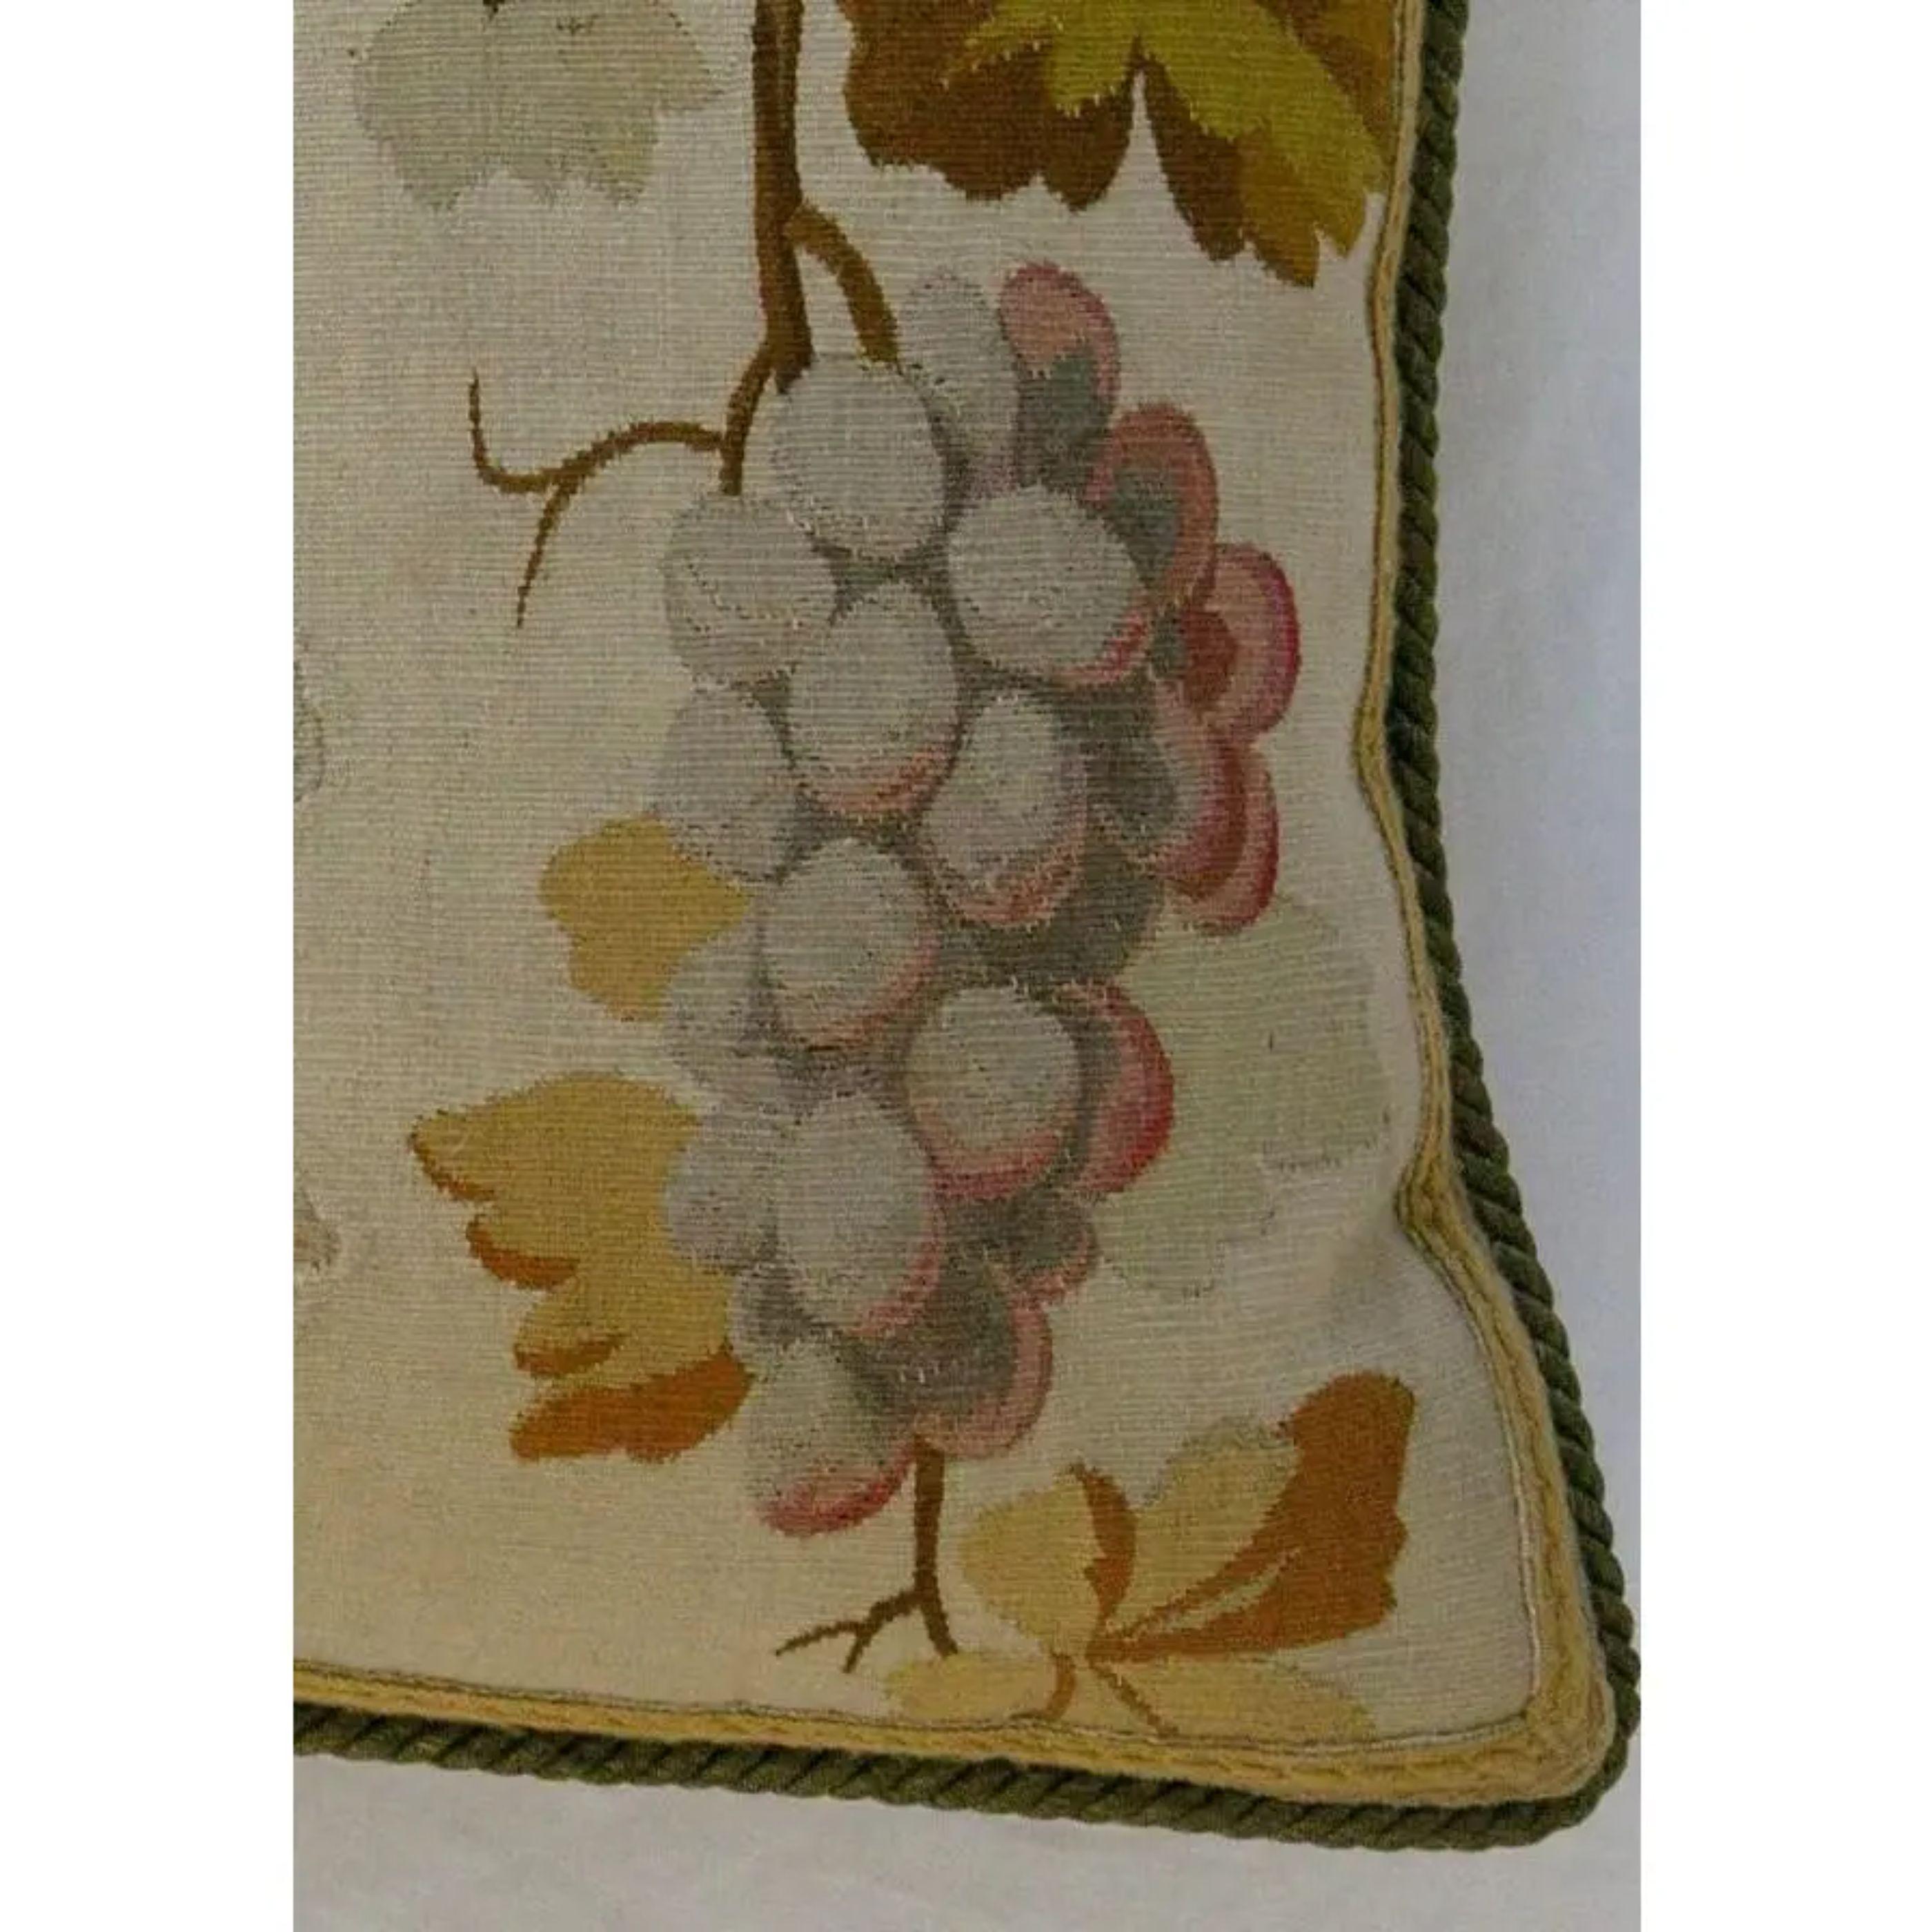 Ca.1800 antique French Aubusson tapestry pillow with grapes on ivory background 20'' x 15''. Features needlework. Handmade.